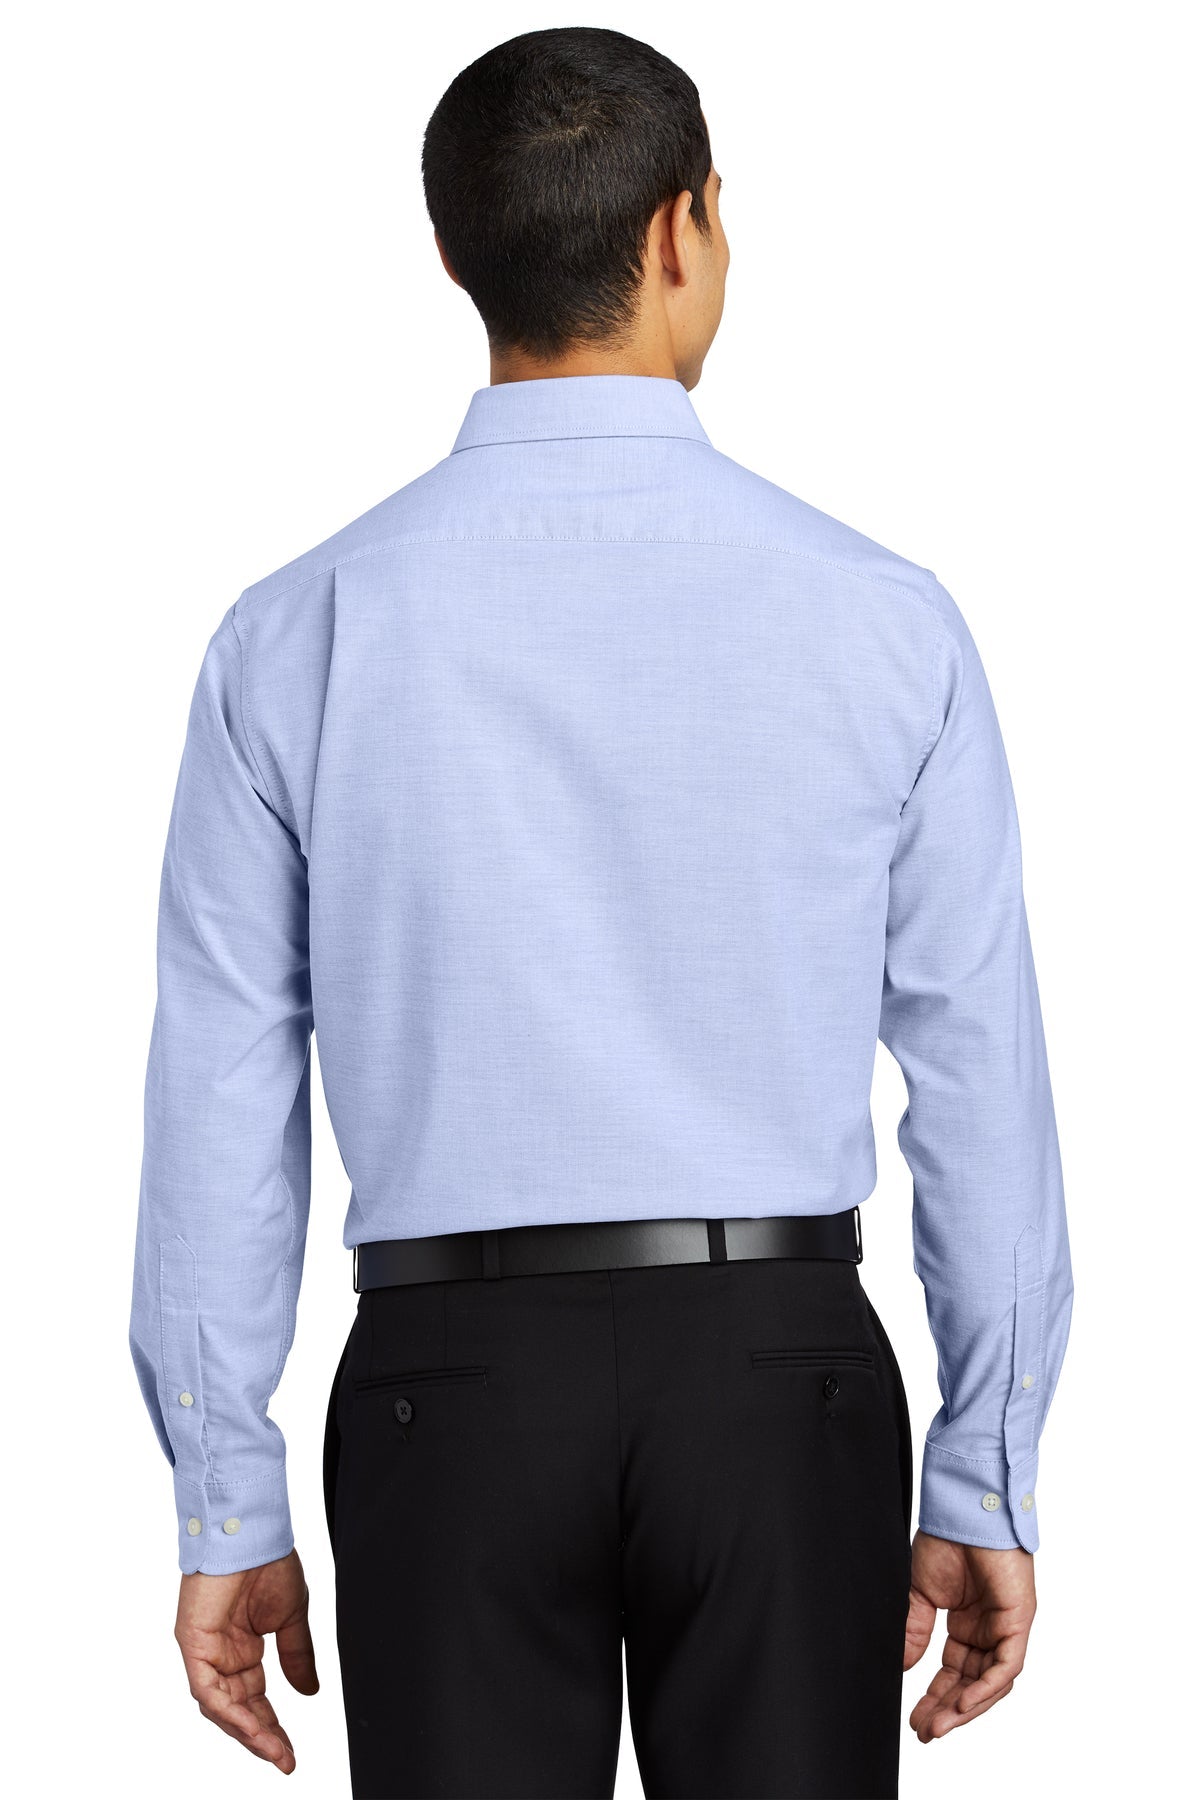 port authority_s658 _oxford blue_company_logo_button downs